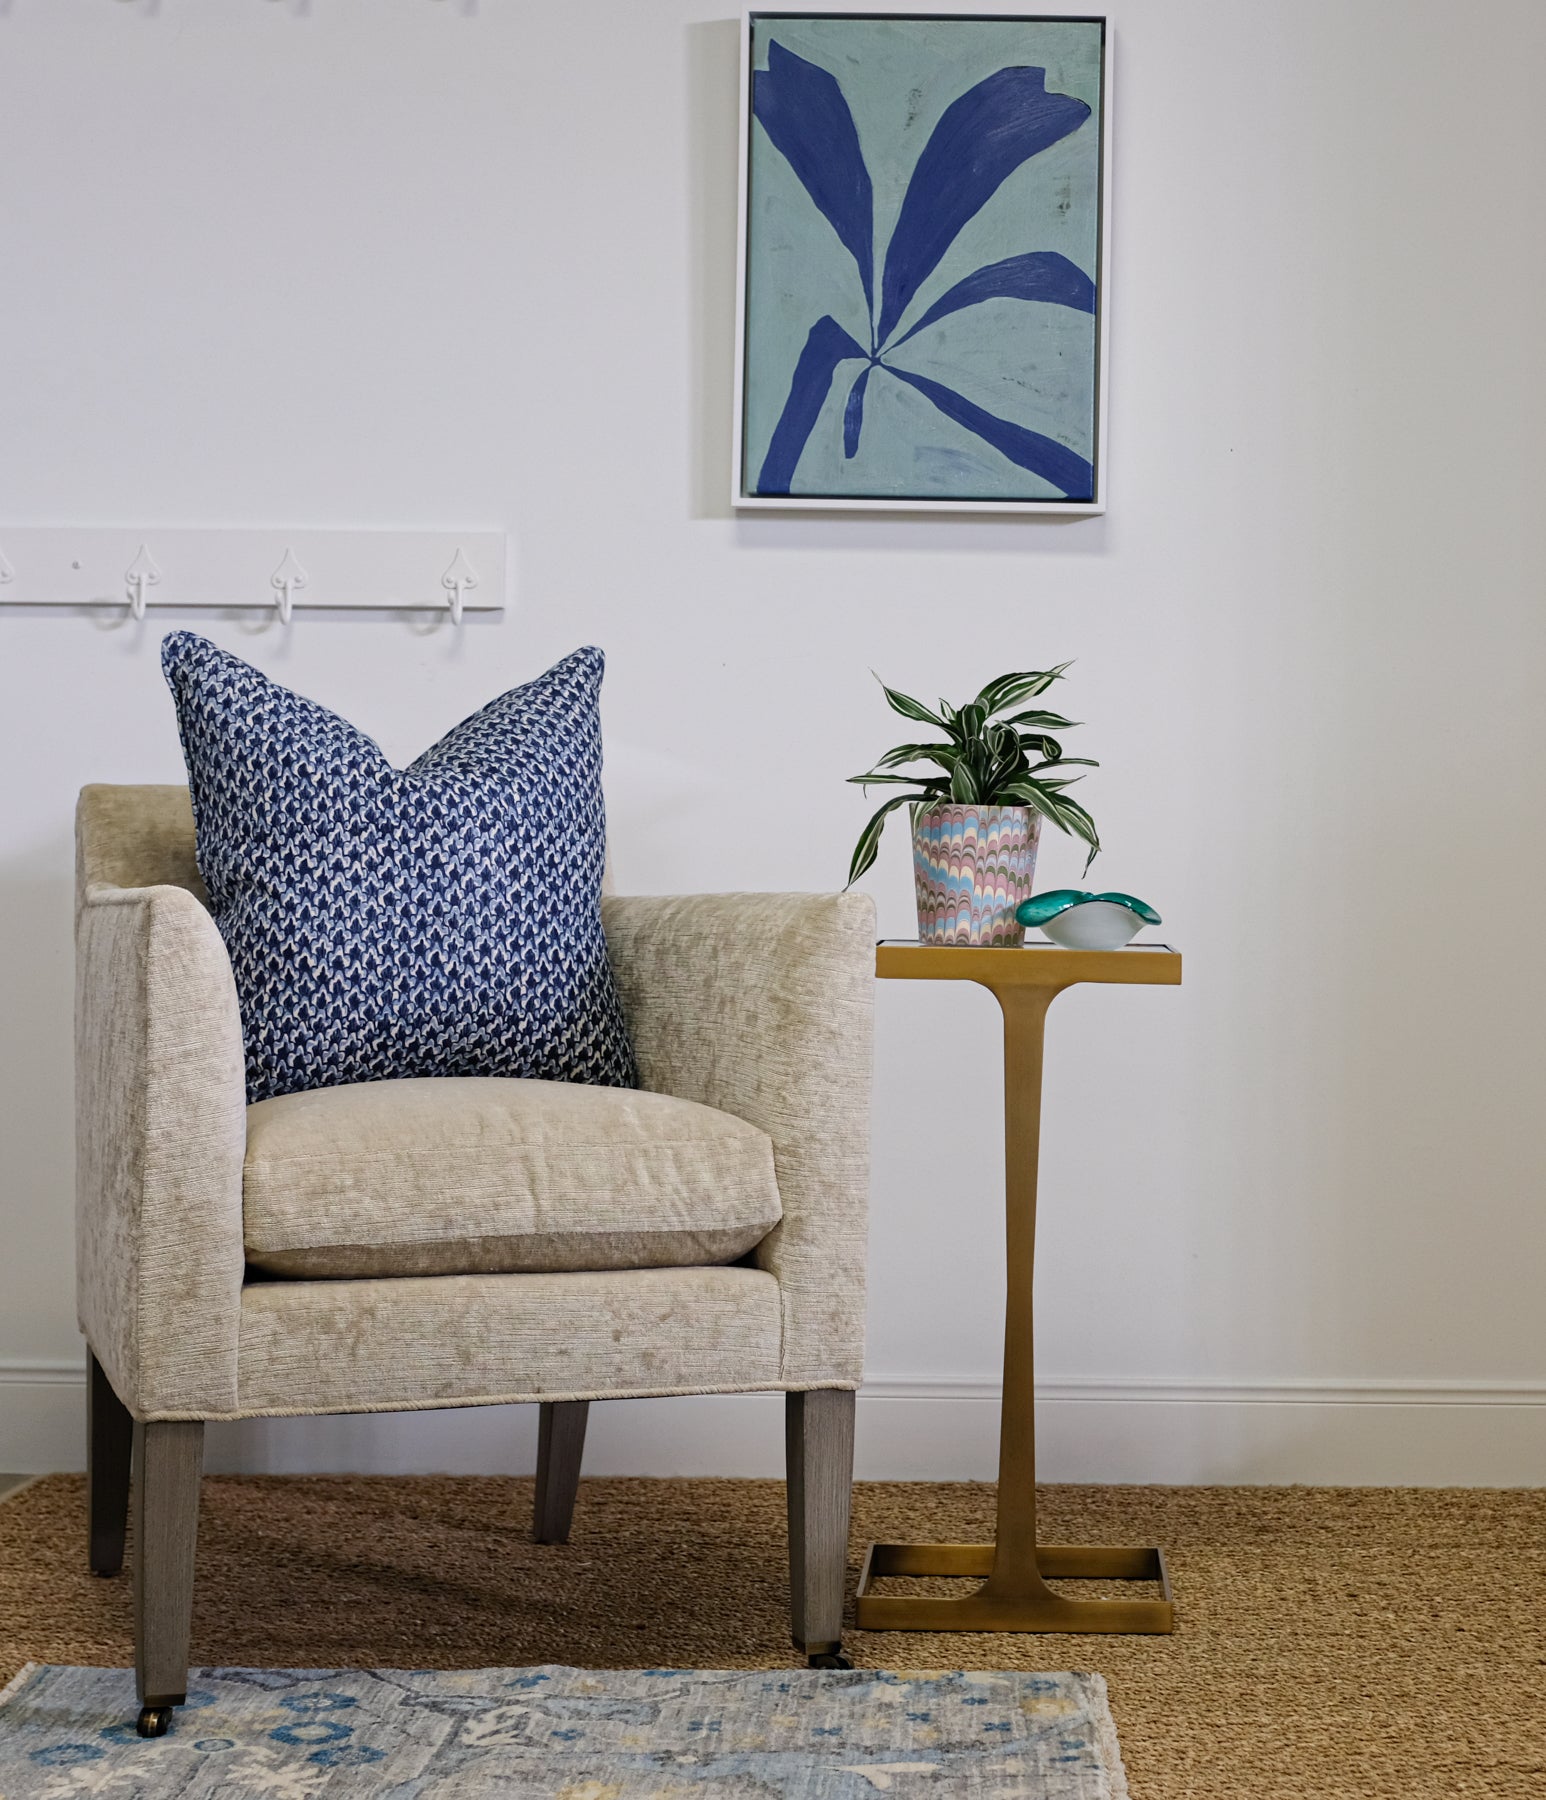 velvet chair shown with side table, blue pillow and rug, and graphic blue canvas artwork